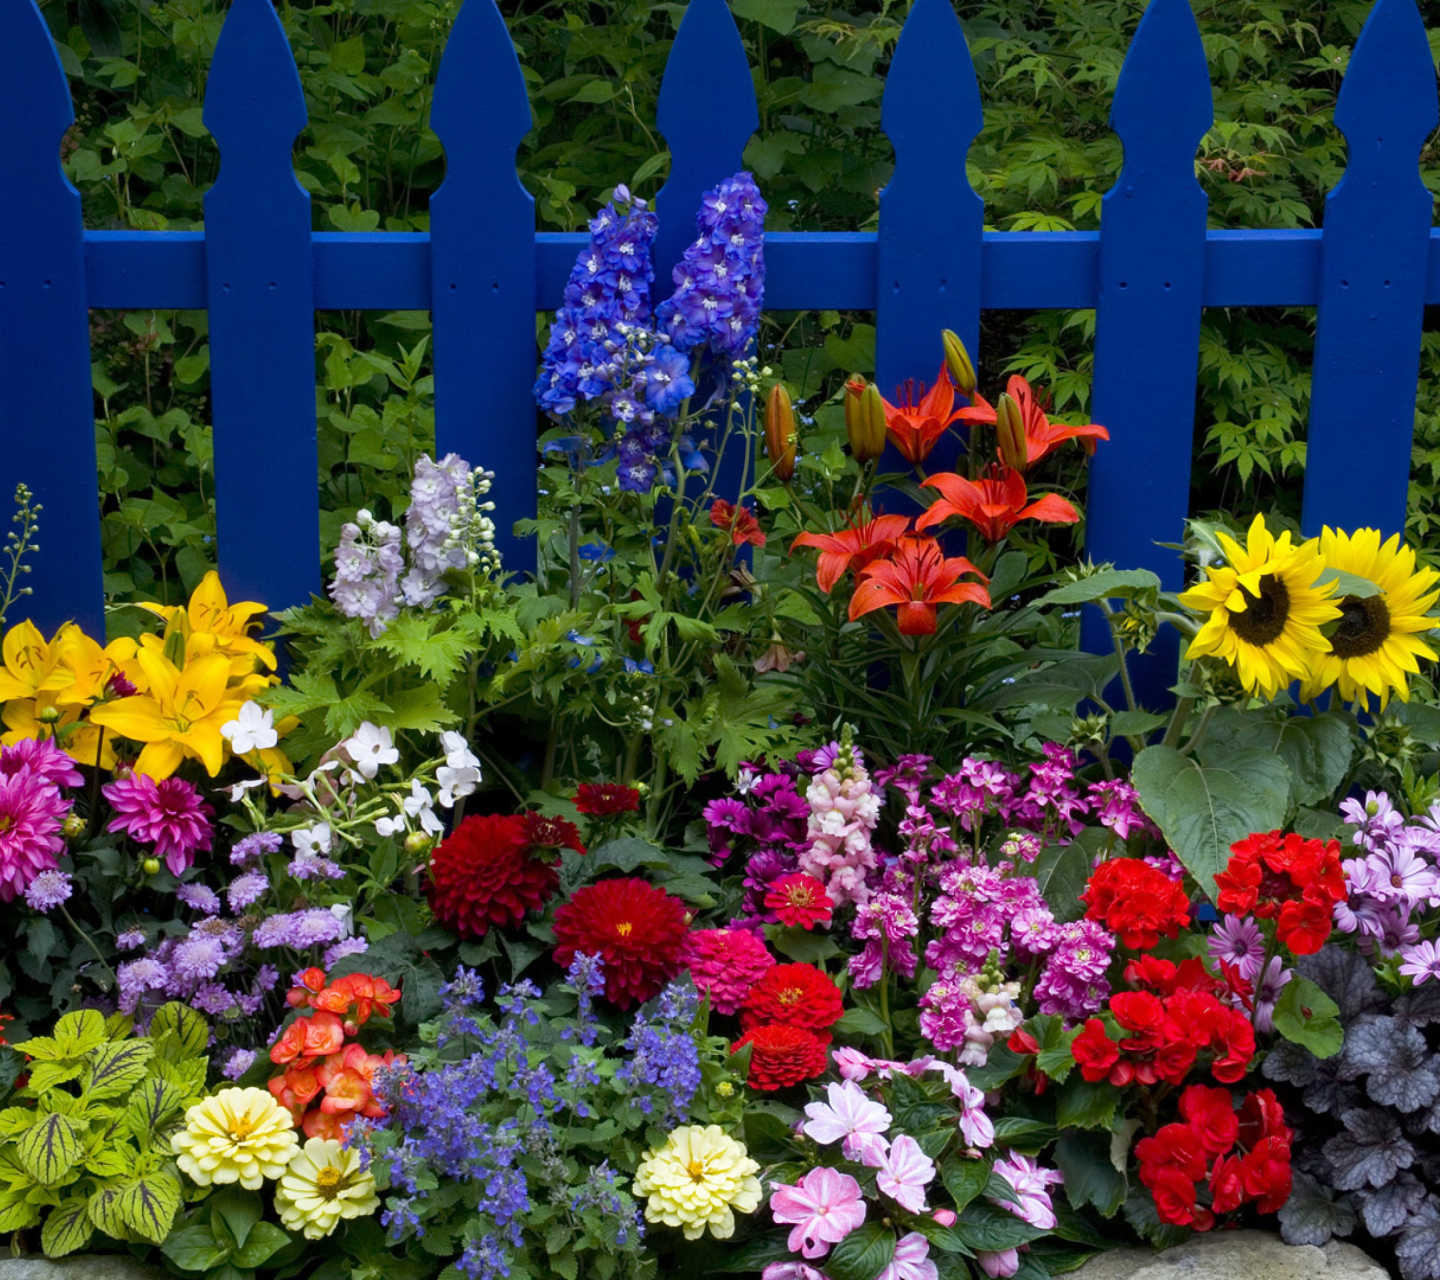 Garden Flowers In Front Of Bright Blue Fence screenshot #1 1440x1280